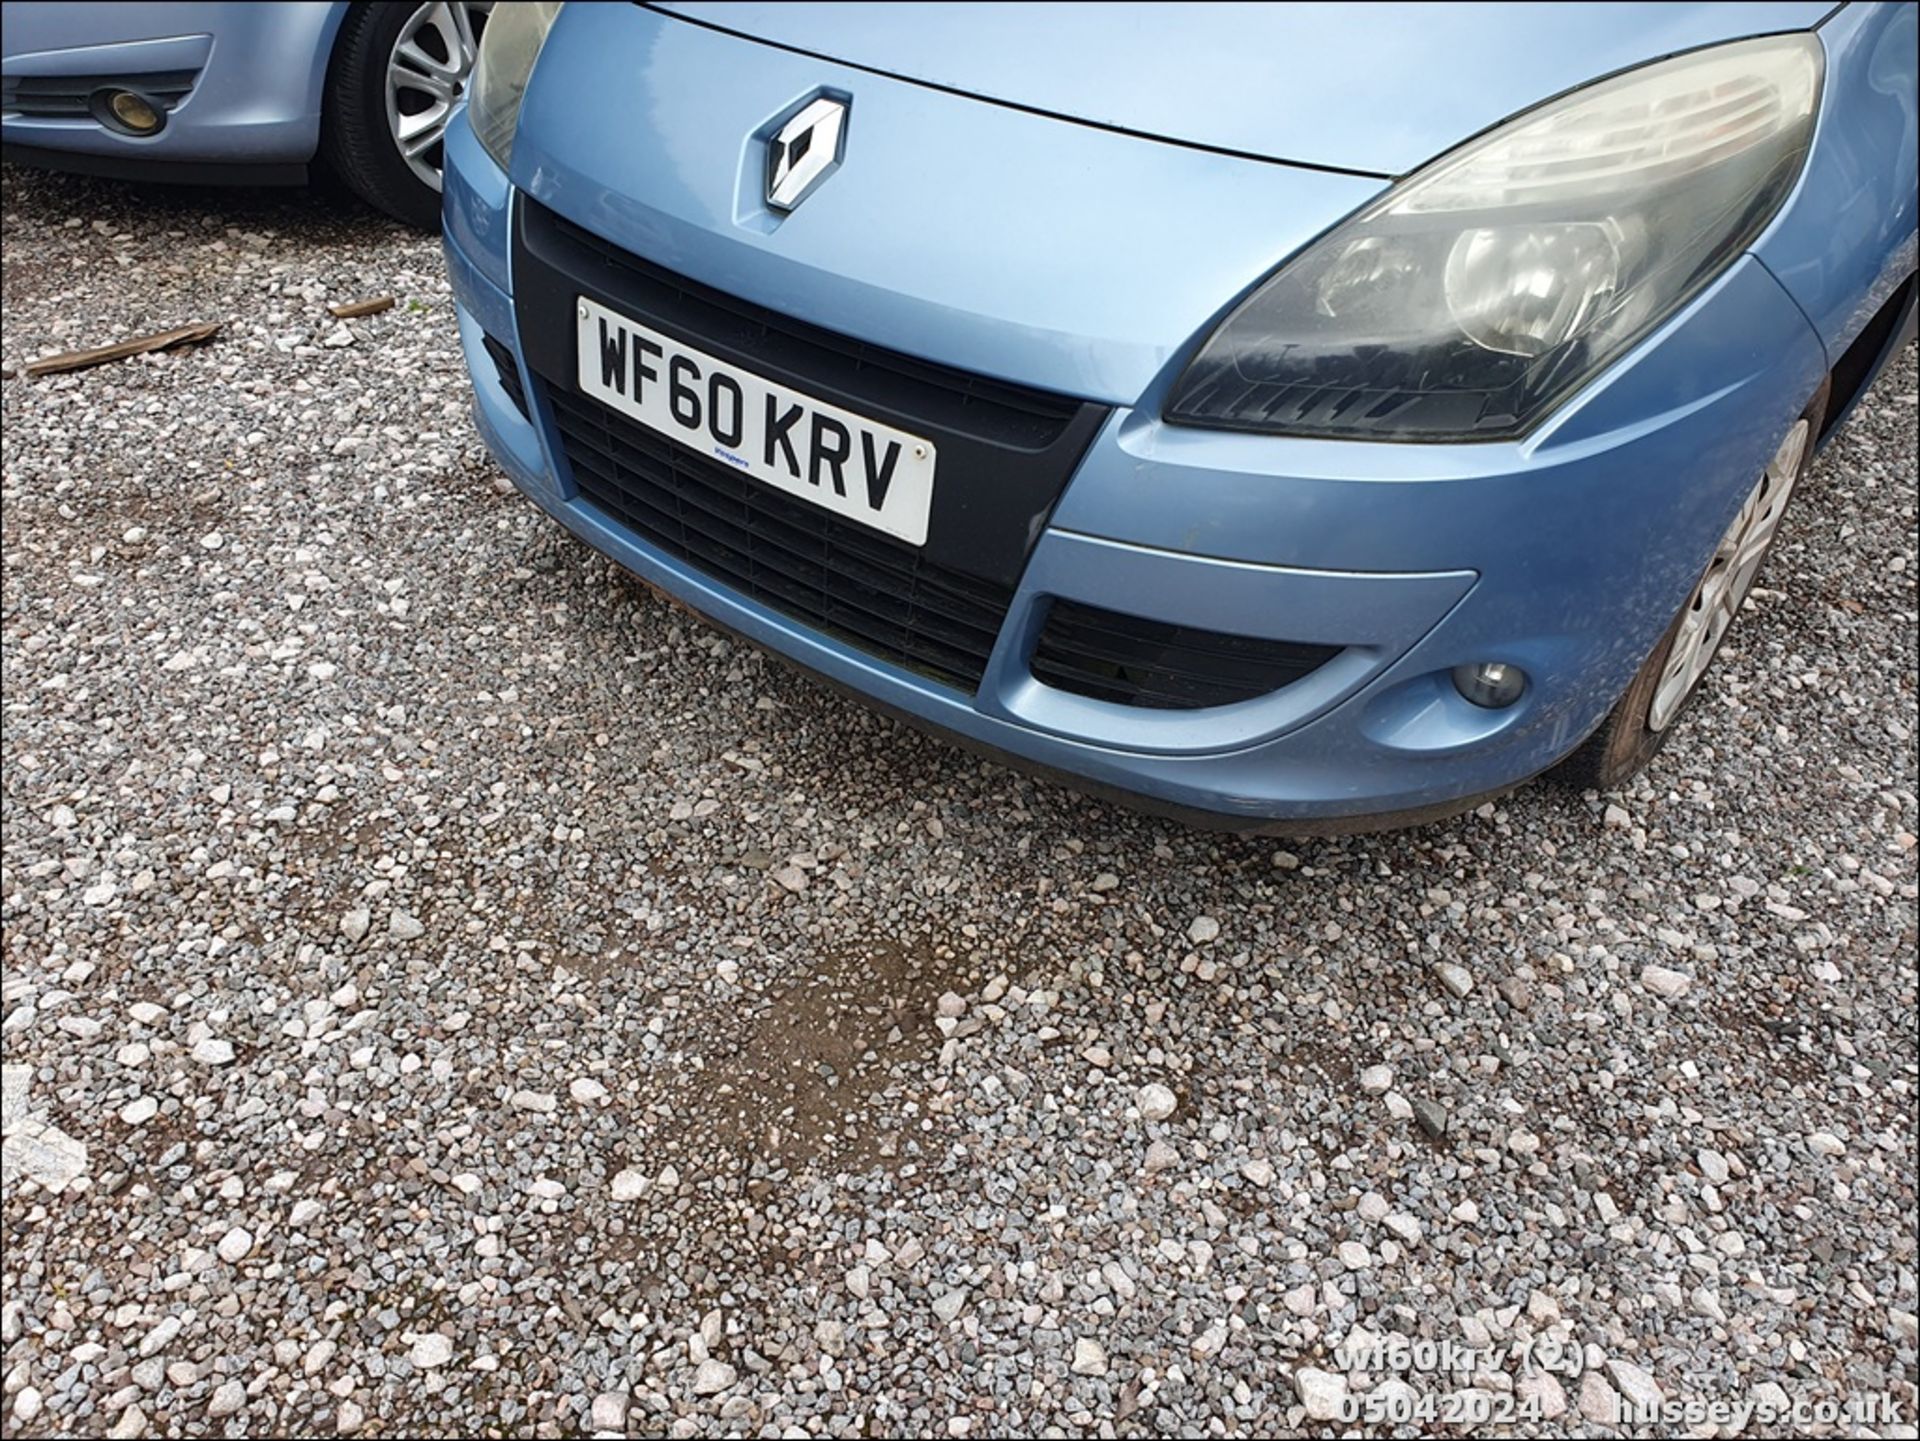 10/60 RENAULT SCENIC EXPRESSION DCI 105 - 1461cc 5dr MPV (Blue) - Image 3 of 50